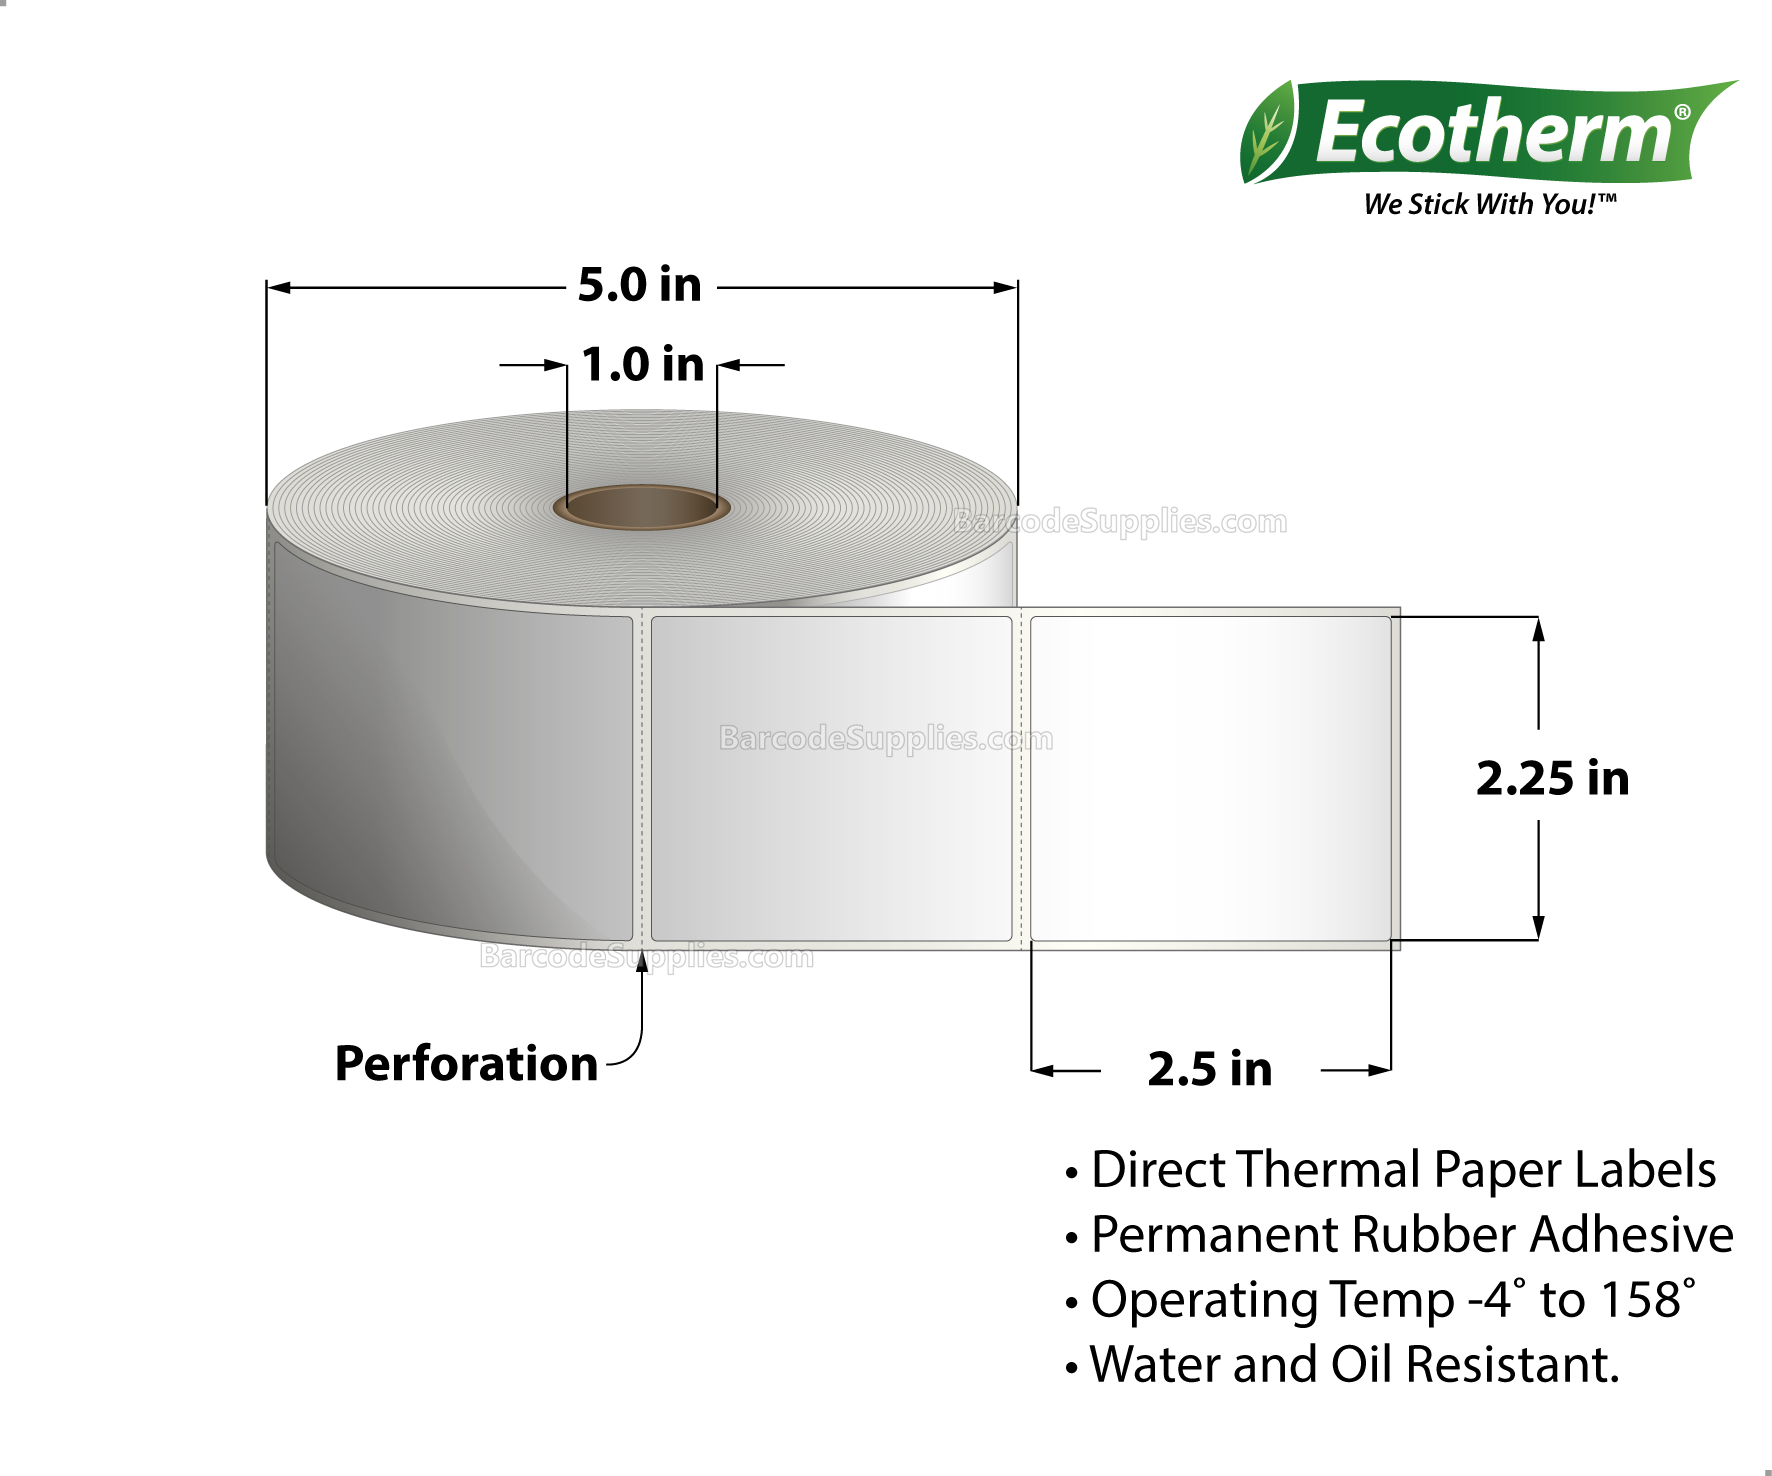 2.25 x 2.5 Direct Thermal White Labels With Rubber Adhesive - Perforated - 1000 Labels Per Roll - Carton Of 6 Rolls - 6000 Labels Total - MPN: ECOTHERM15130-6